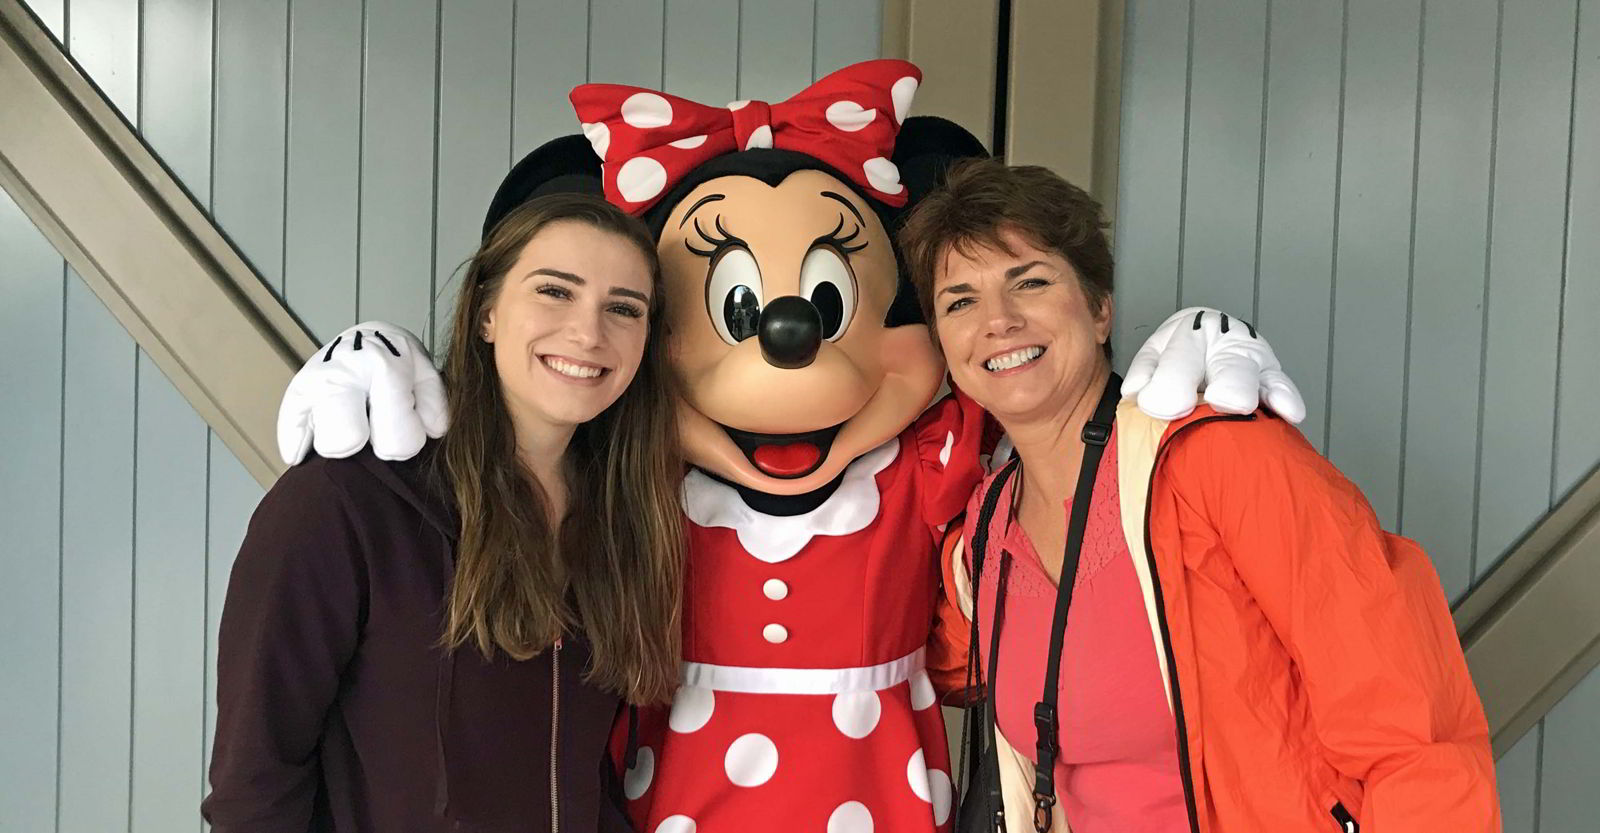 An image of two women posing with Minnie Mouse at Disneyland - travel rewards programs